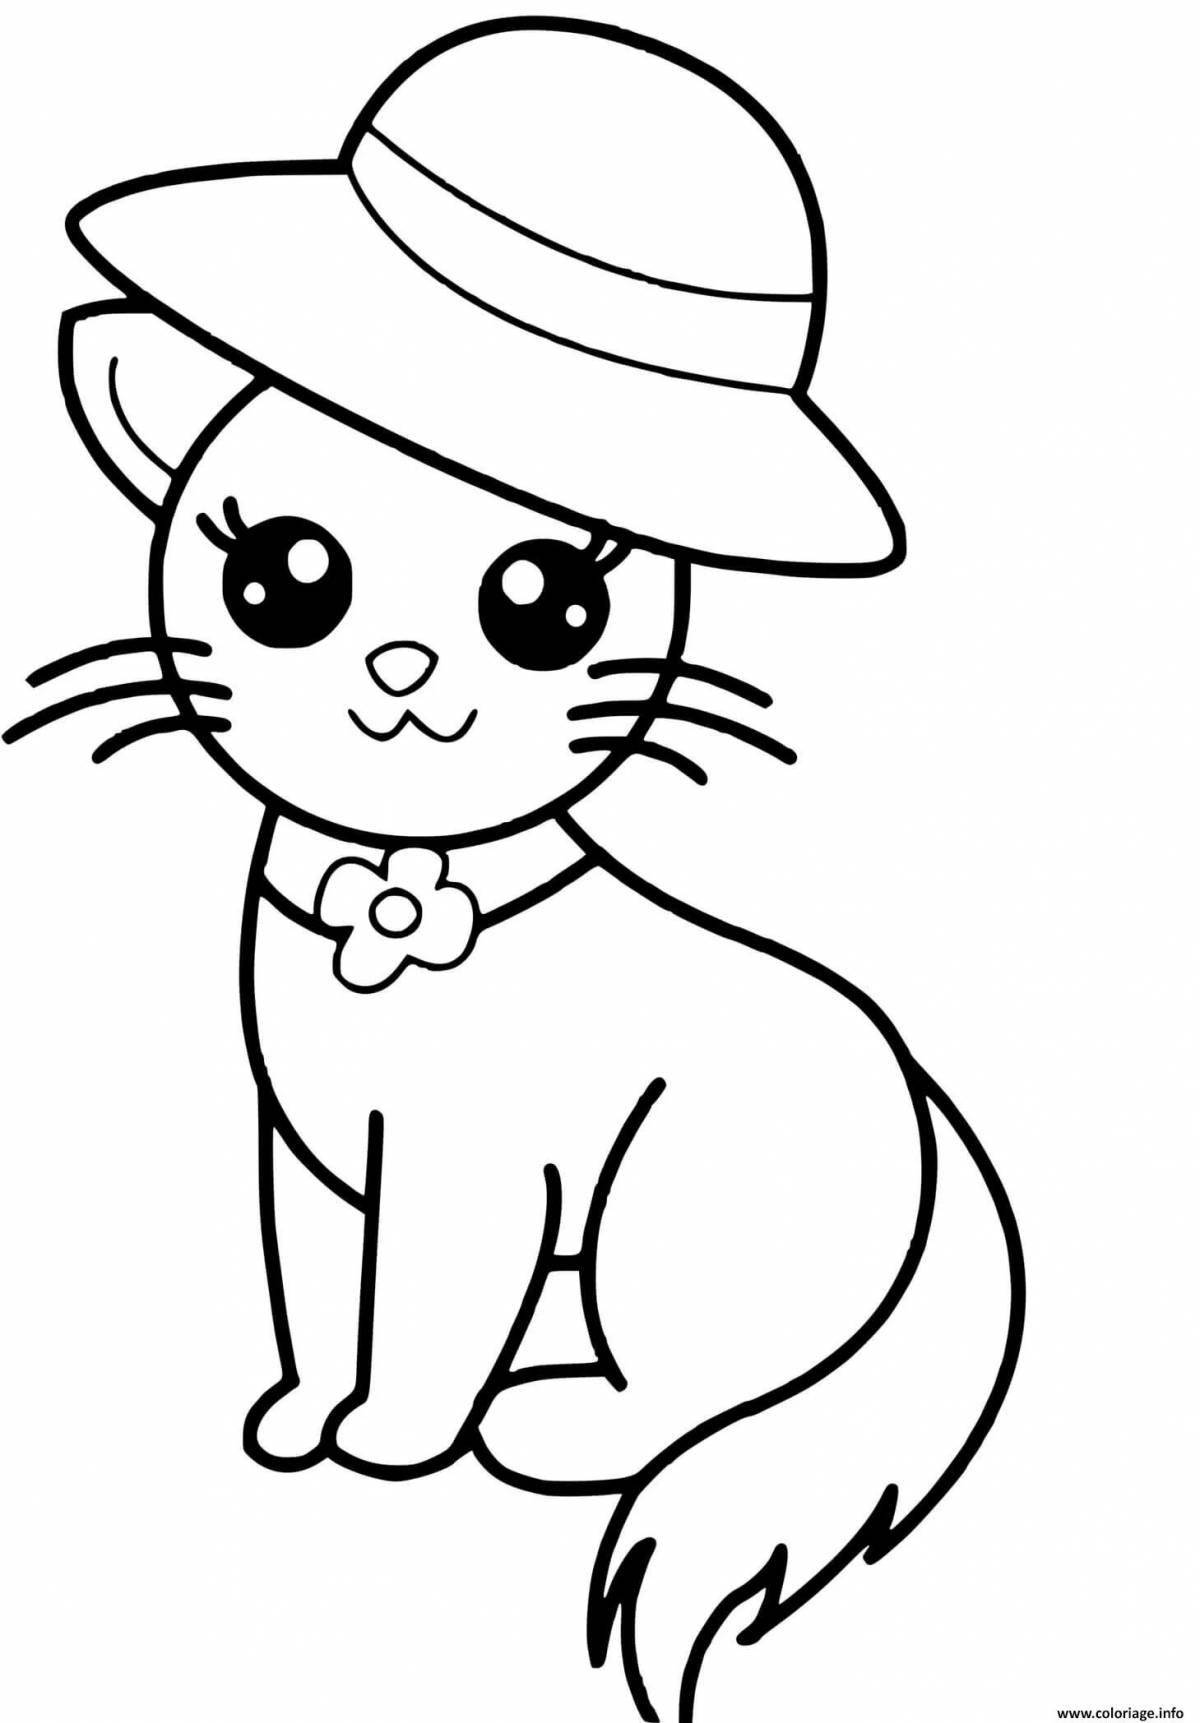 Snuggable coloring page cat for 2-3 year olds